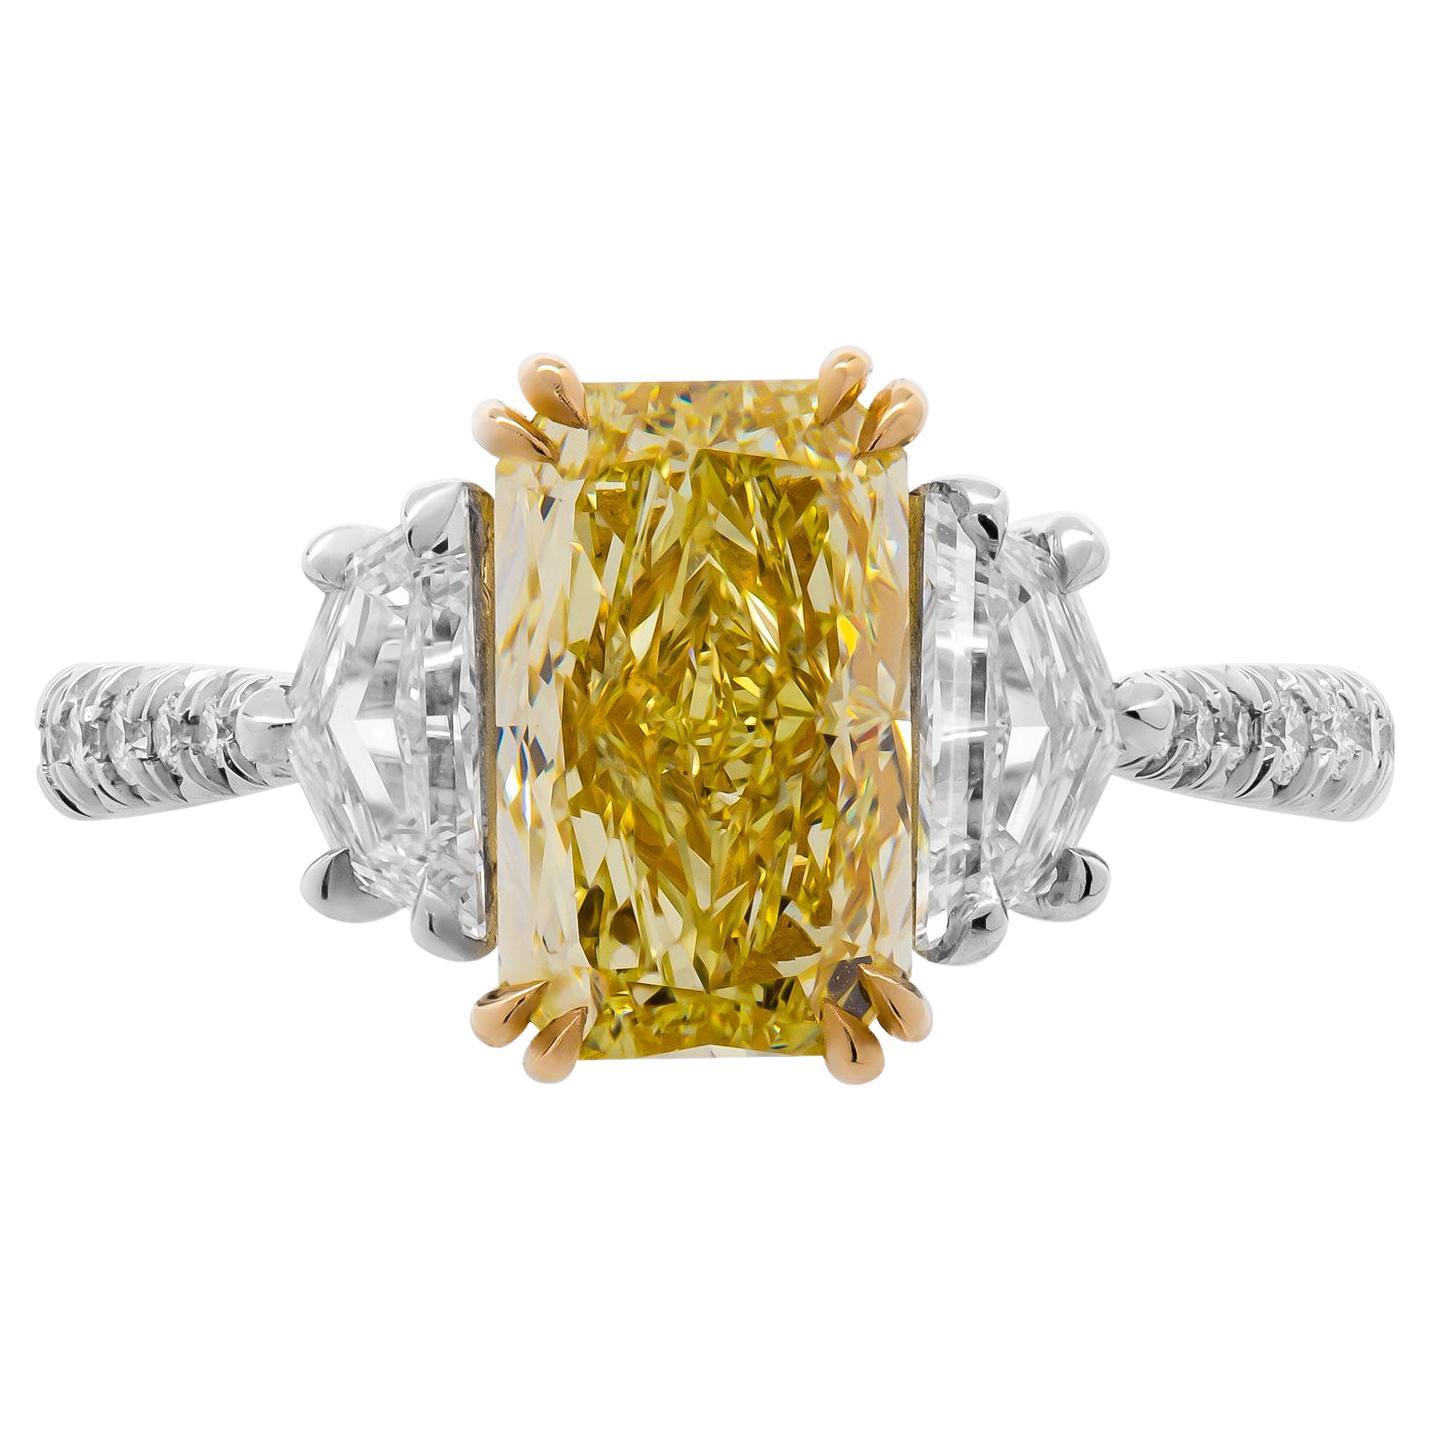 Mounted in handmade custom design setting featuring Platinum 950 & 22K Yellow Gold, diamonds on the shank and on a basket under each stone, a true piece of art Setting features exceptional pave work, delicate yet sturdy, includes approximately